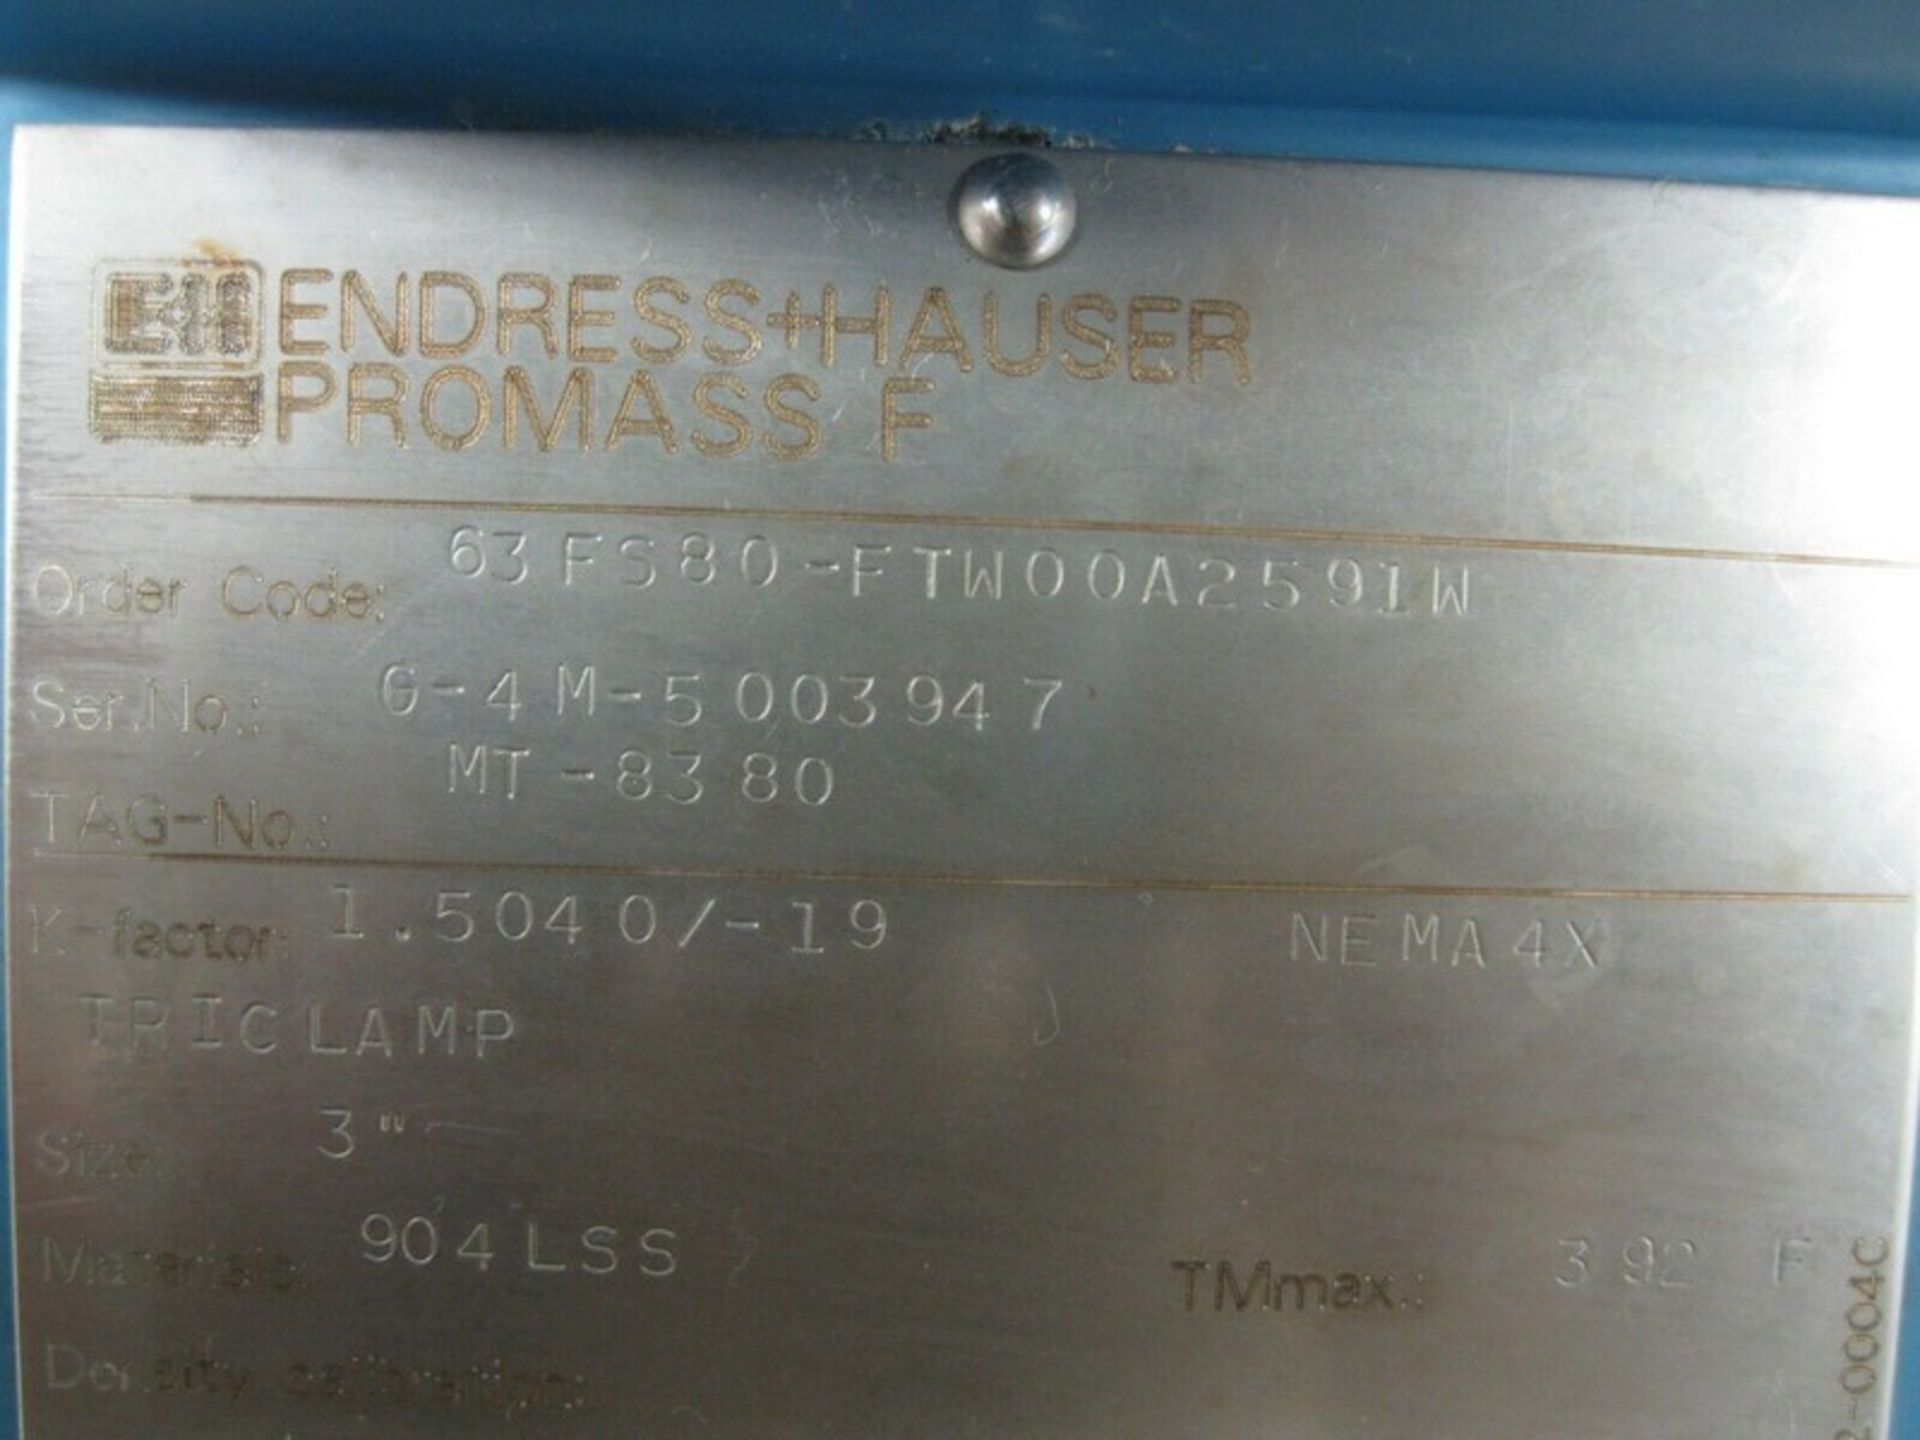 3" Endress Hauser 63FS80-FTW00A2591W Promass 63 F Flowmeter Profibus (Located Springfield, NH)( - Image 8 of 8